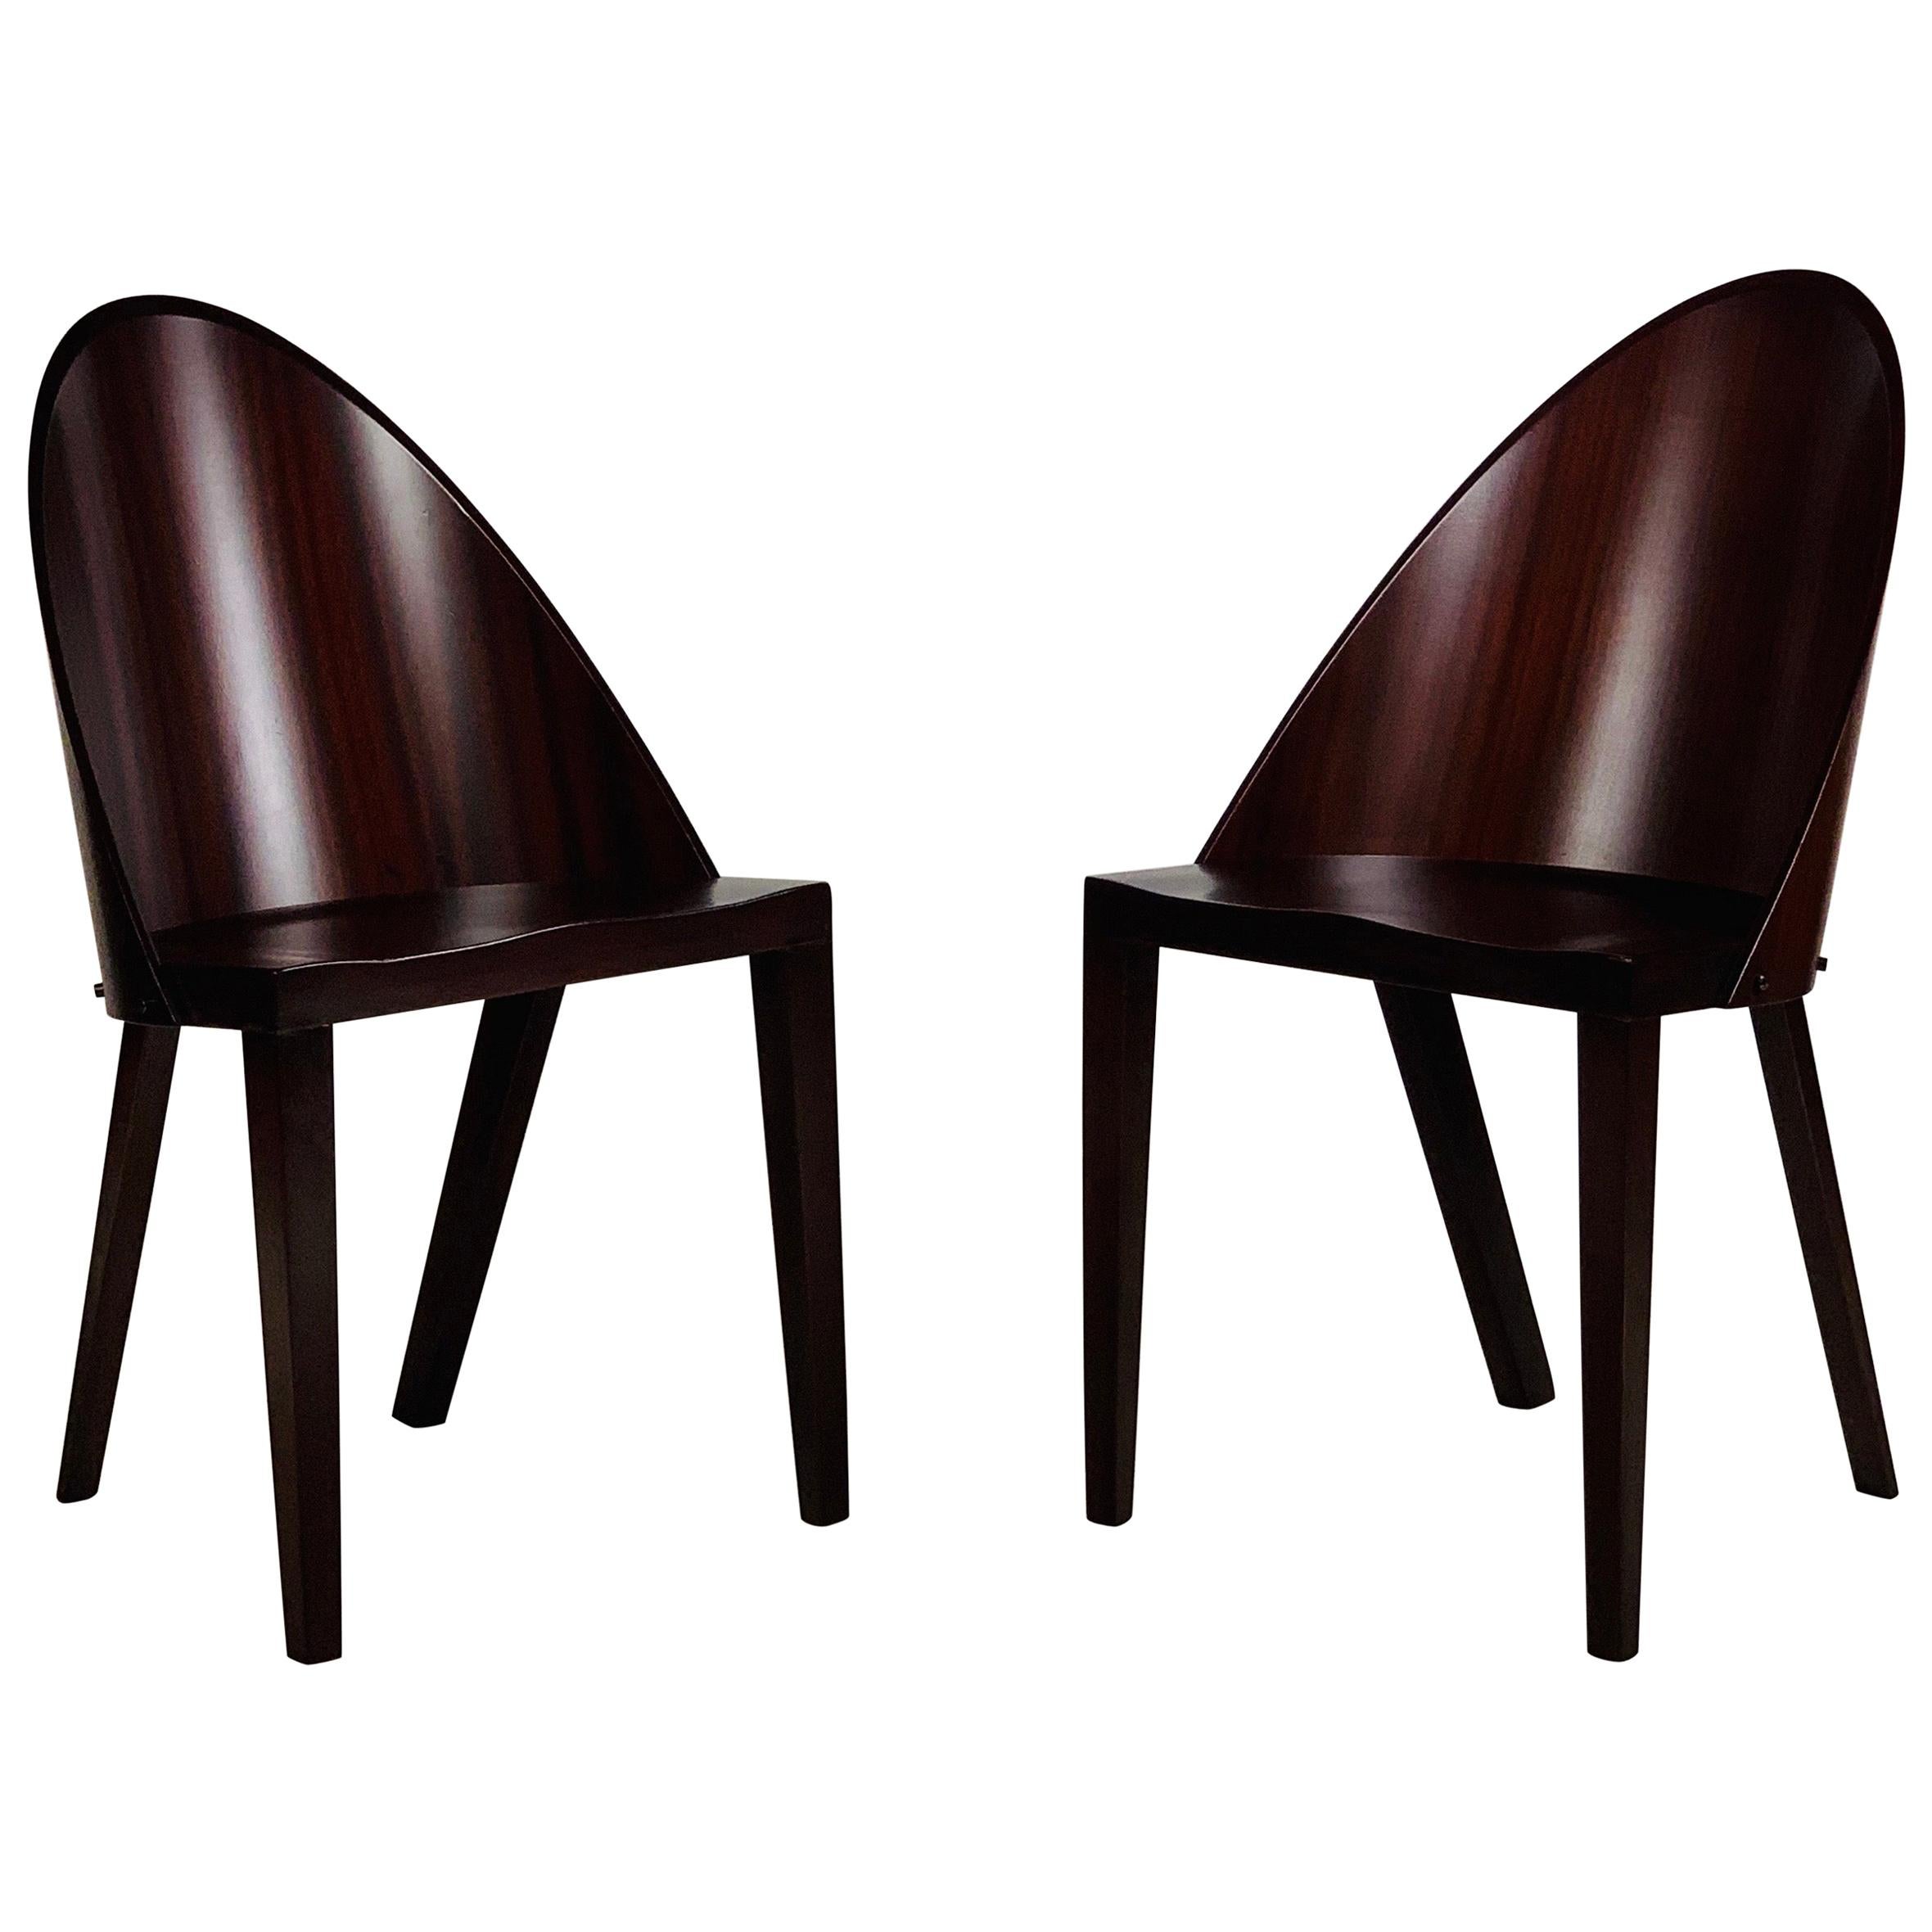 Rare Pair of Philippe Starck Chairs from the Royalton Hotel, NYC For Sale